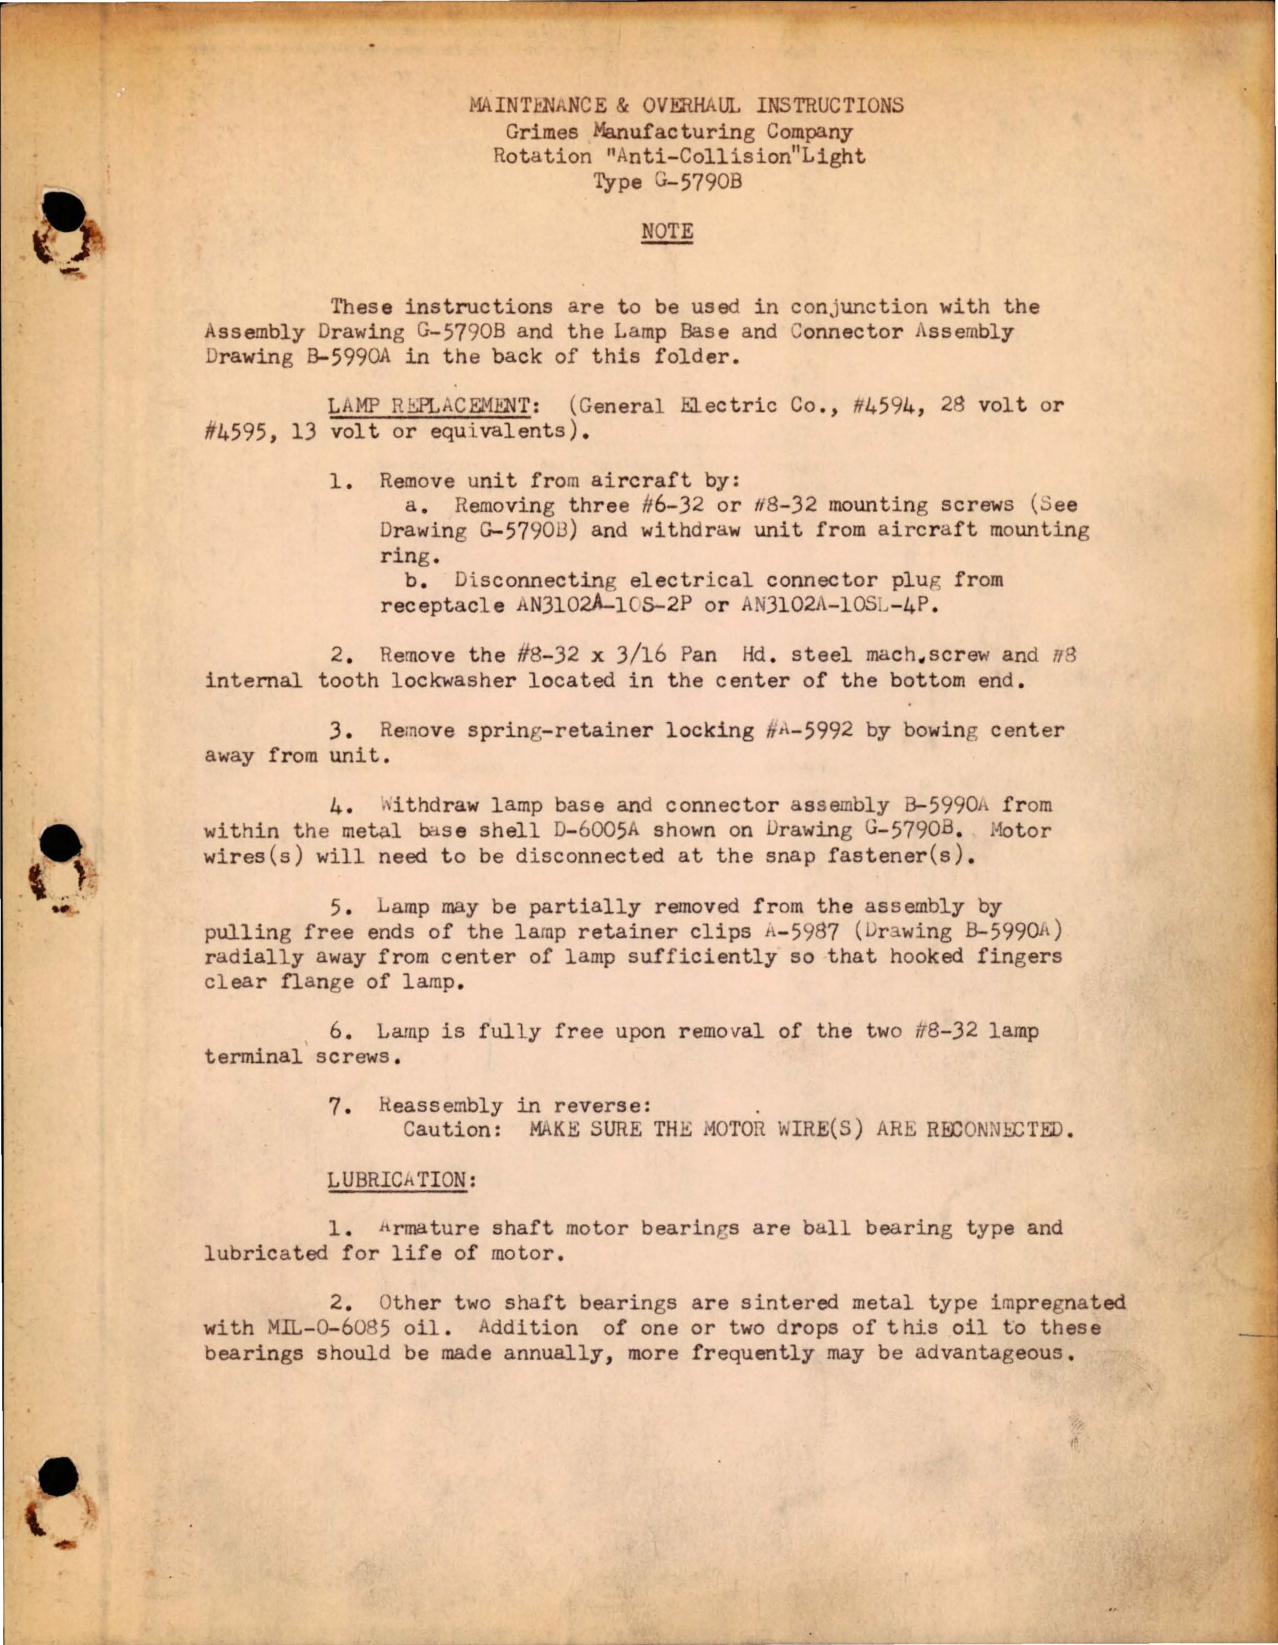 Sample page 1 from AirCorps Library document: Maintenance and Overhaul Instructions for Rotation Anti-Collision Light - Type G-5790B